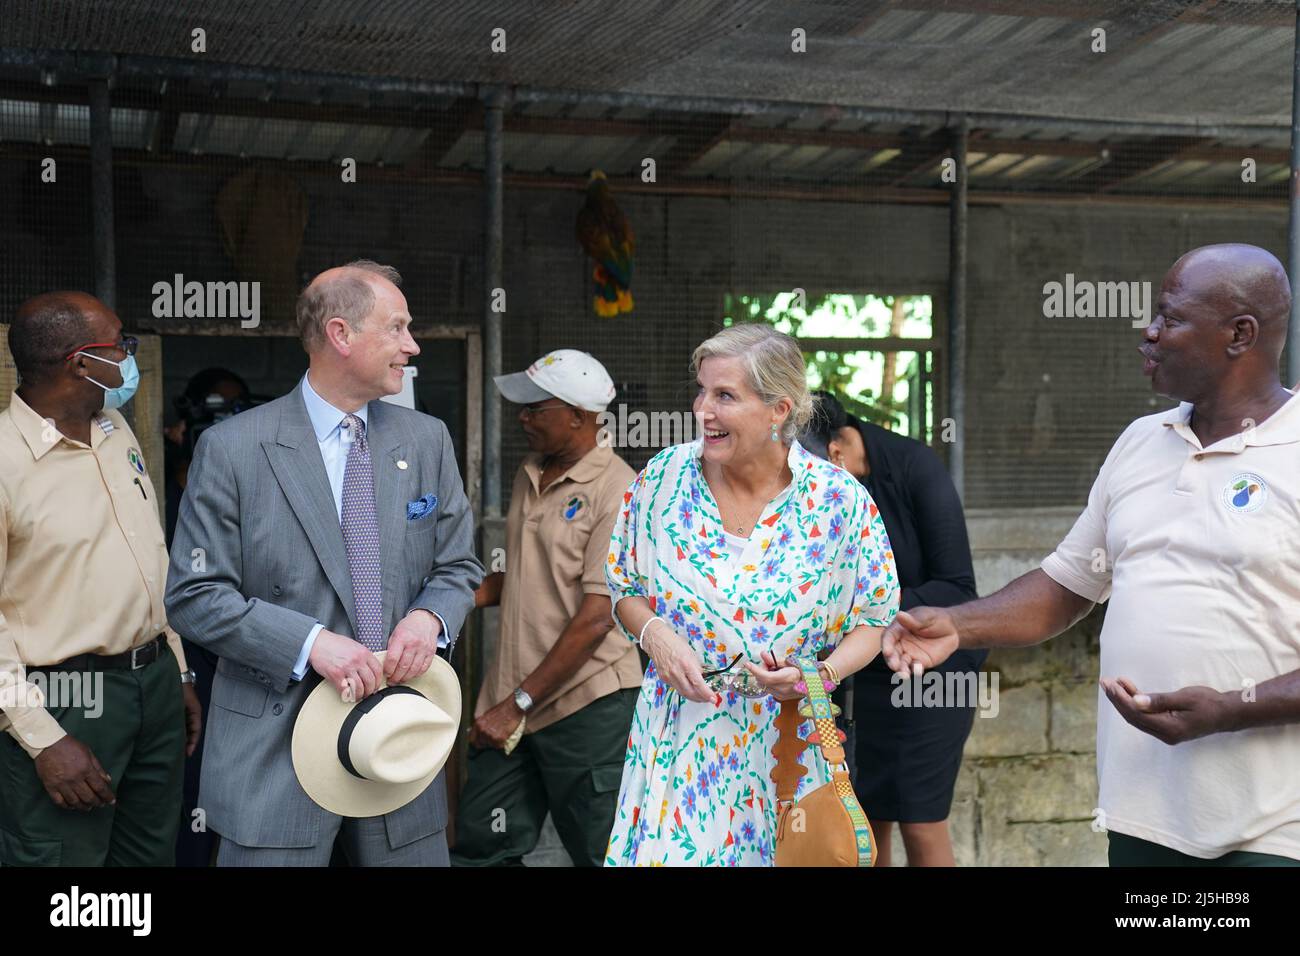 The Earl and the Countess of Wessex with St Vincent's national bird, the Amazona guildingii after it nearly knocked her sunglasses at the Botanical Gardens in St Vincent and the Grenadines, as they continue their visit to the Caribbean, to mark the Queen's Platinum Jubilee. Picture date: Saturday April 23, 2022. Stock Photo